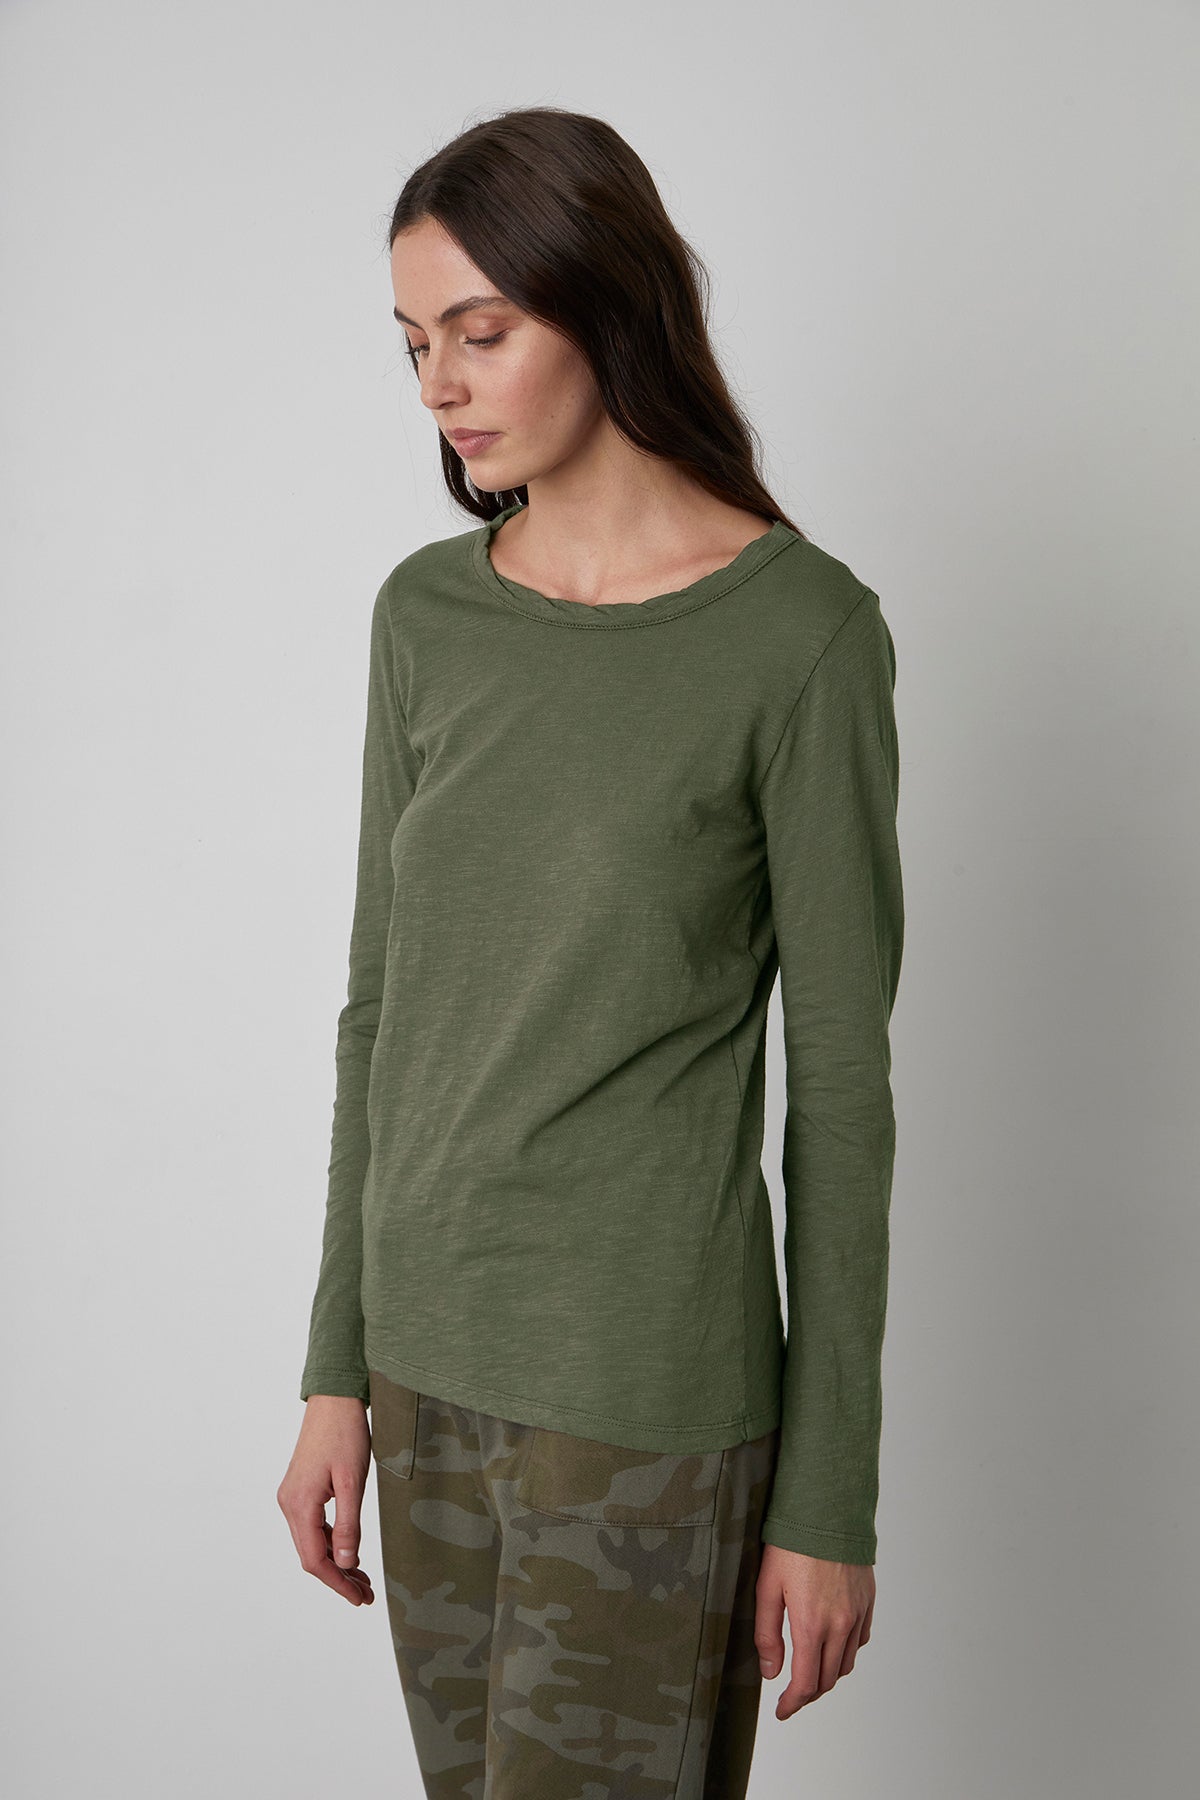 Lizzie Tee Olive with Skye Sweatpant Nettle Front & Side 2-26630740639937